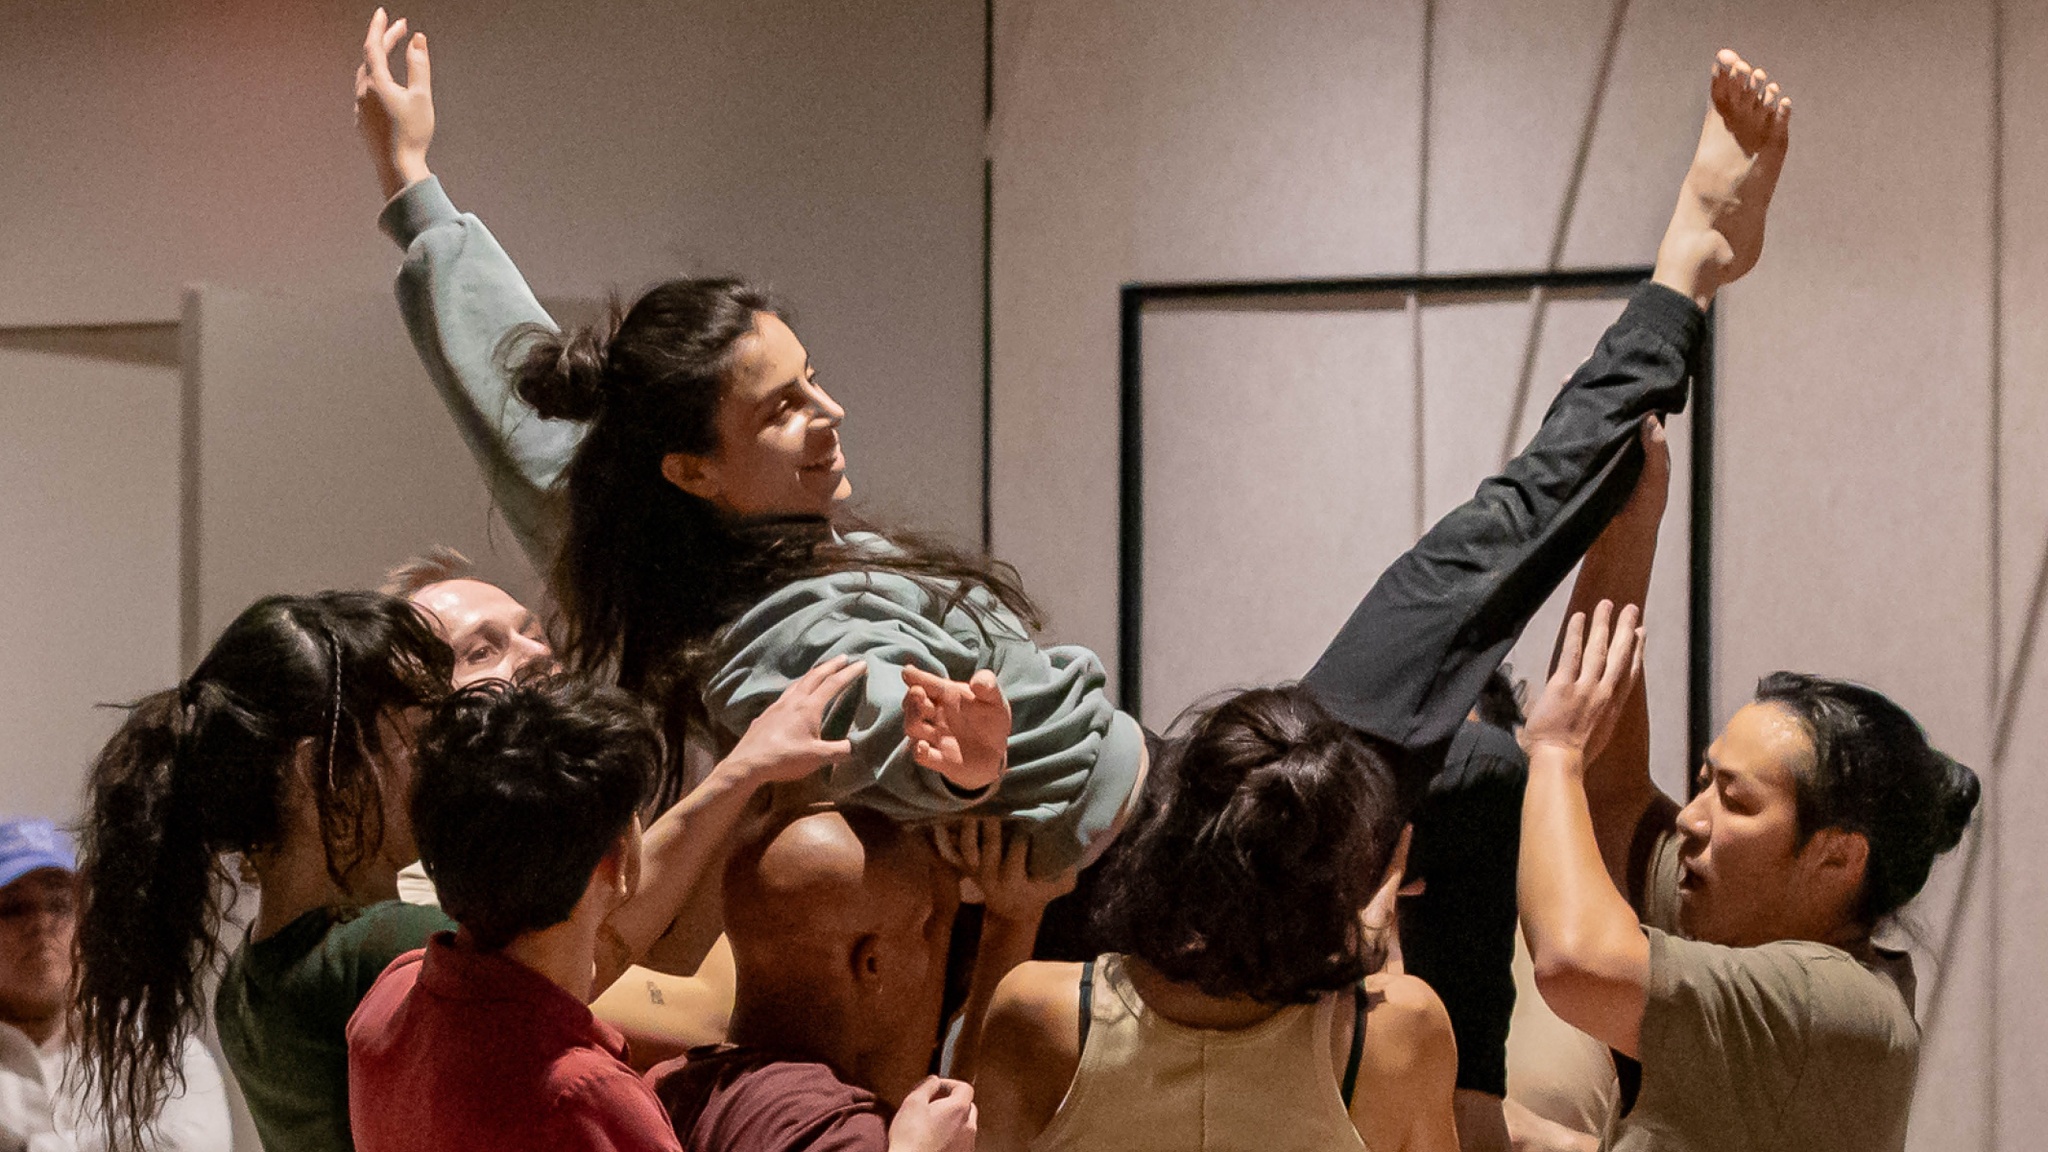 An ensemble of dancers lift another performer overhead. The dancer being held aloft wears a green sweatshirt and gray sweatpants with her arms outstretched exuberantly, extending one leg with a bare foot pointed toward the ceiling. She is smiling while the other performers support her.